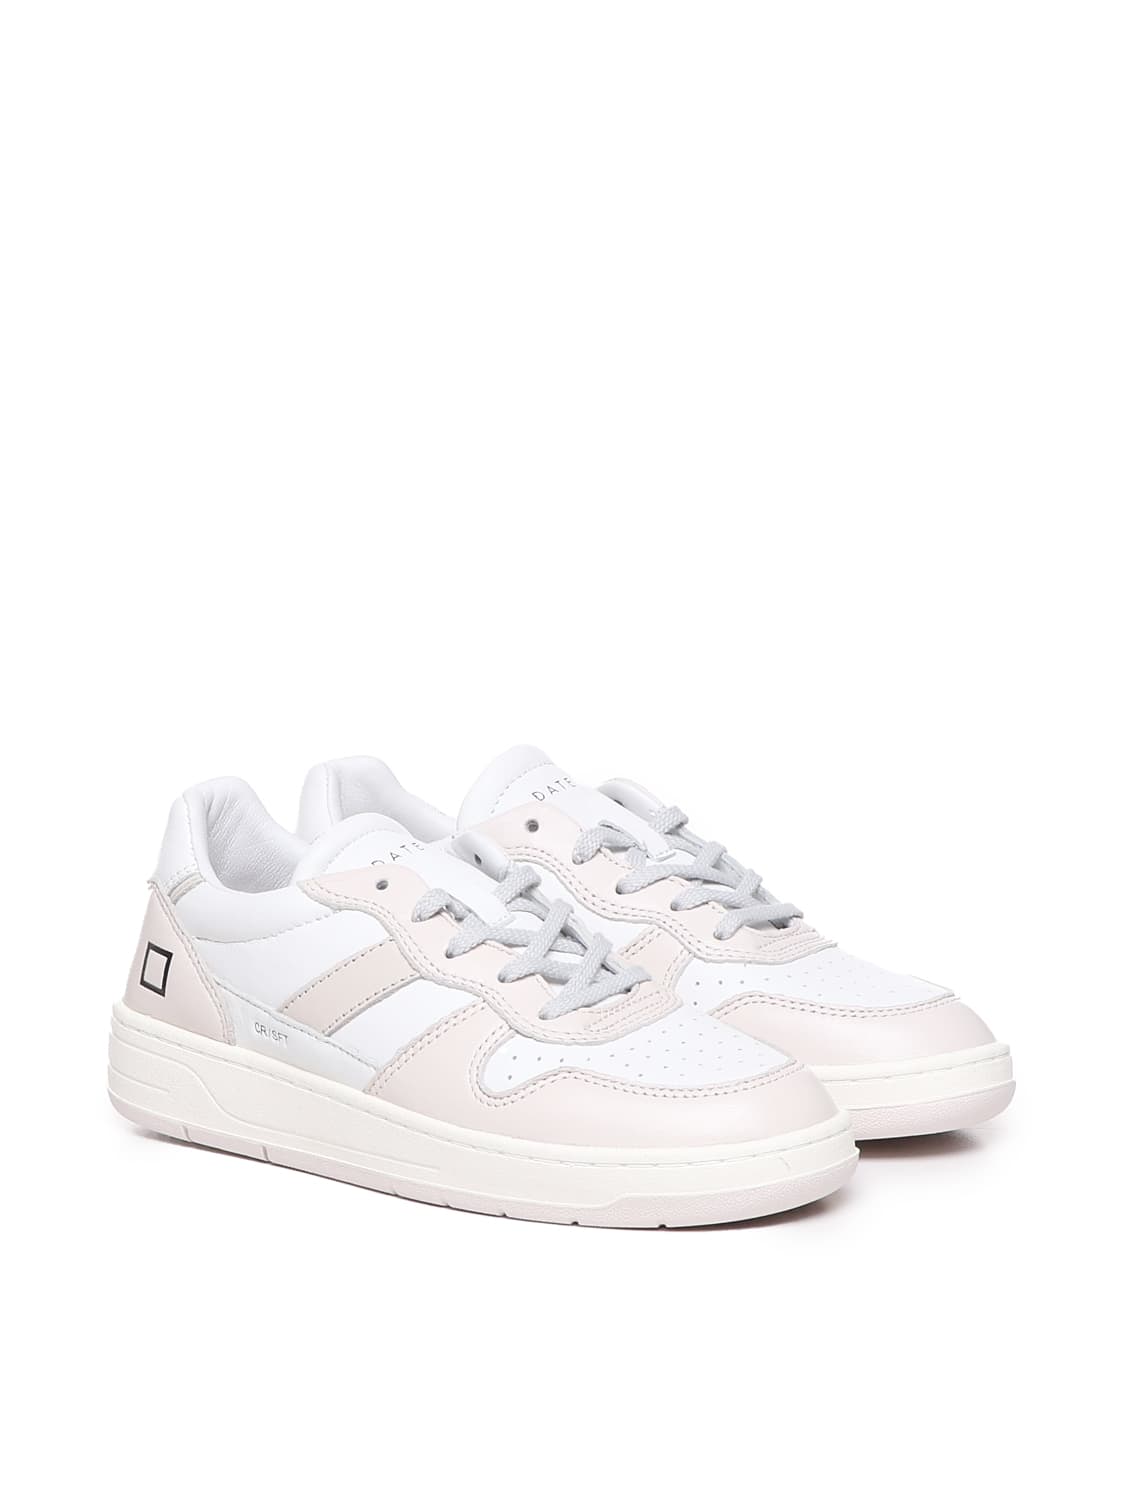 Shop Date Court 2.0 Soft Sneakers In White-pink